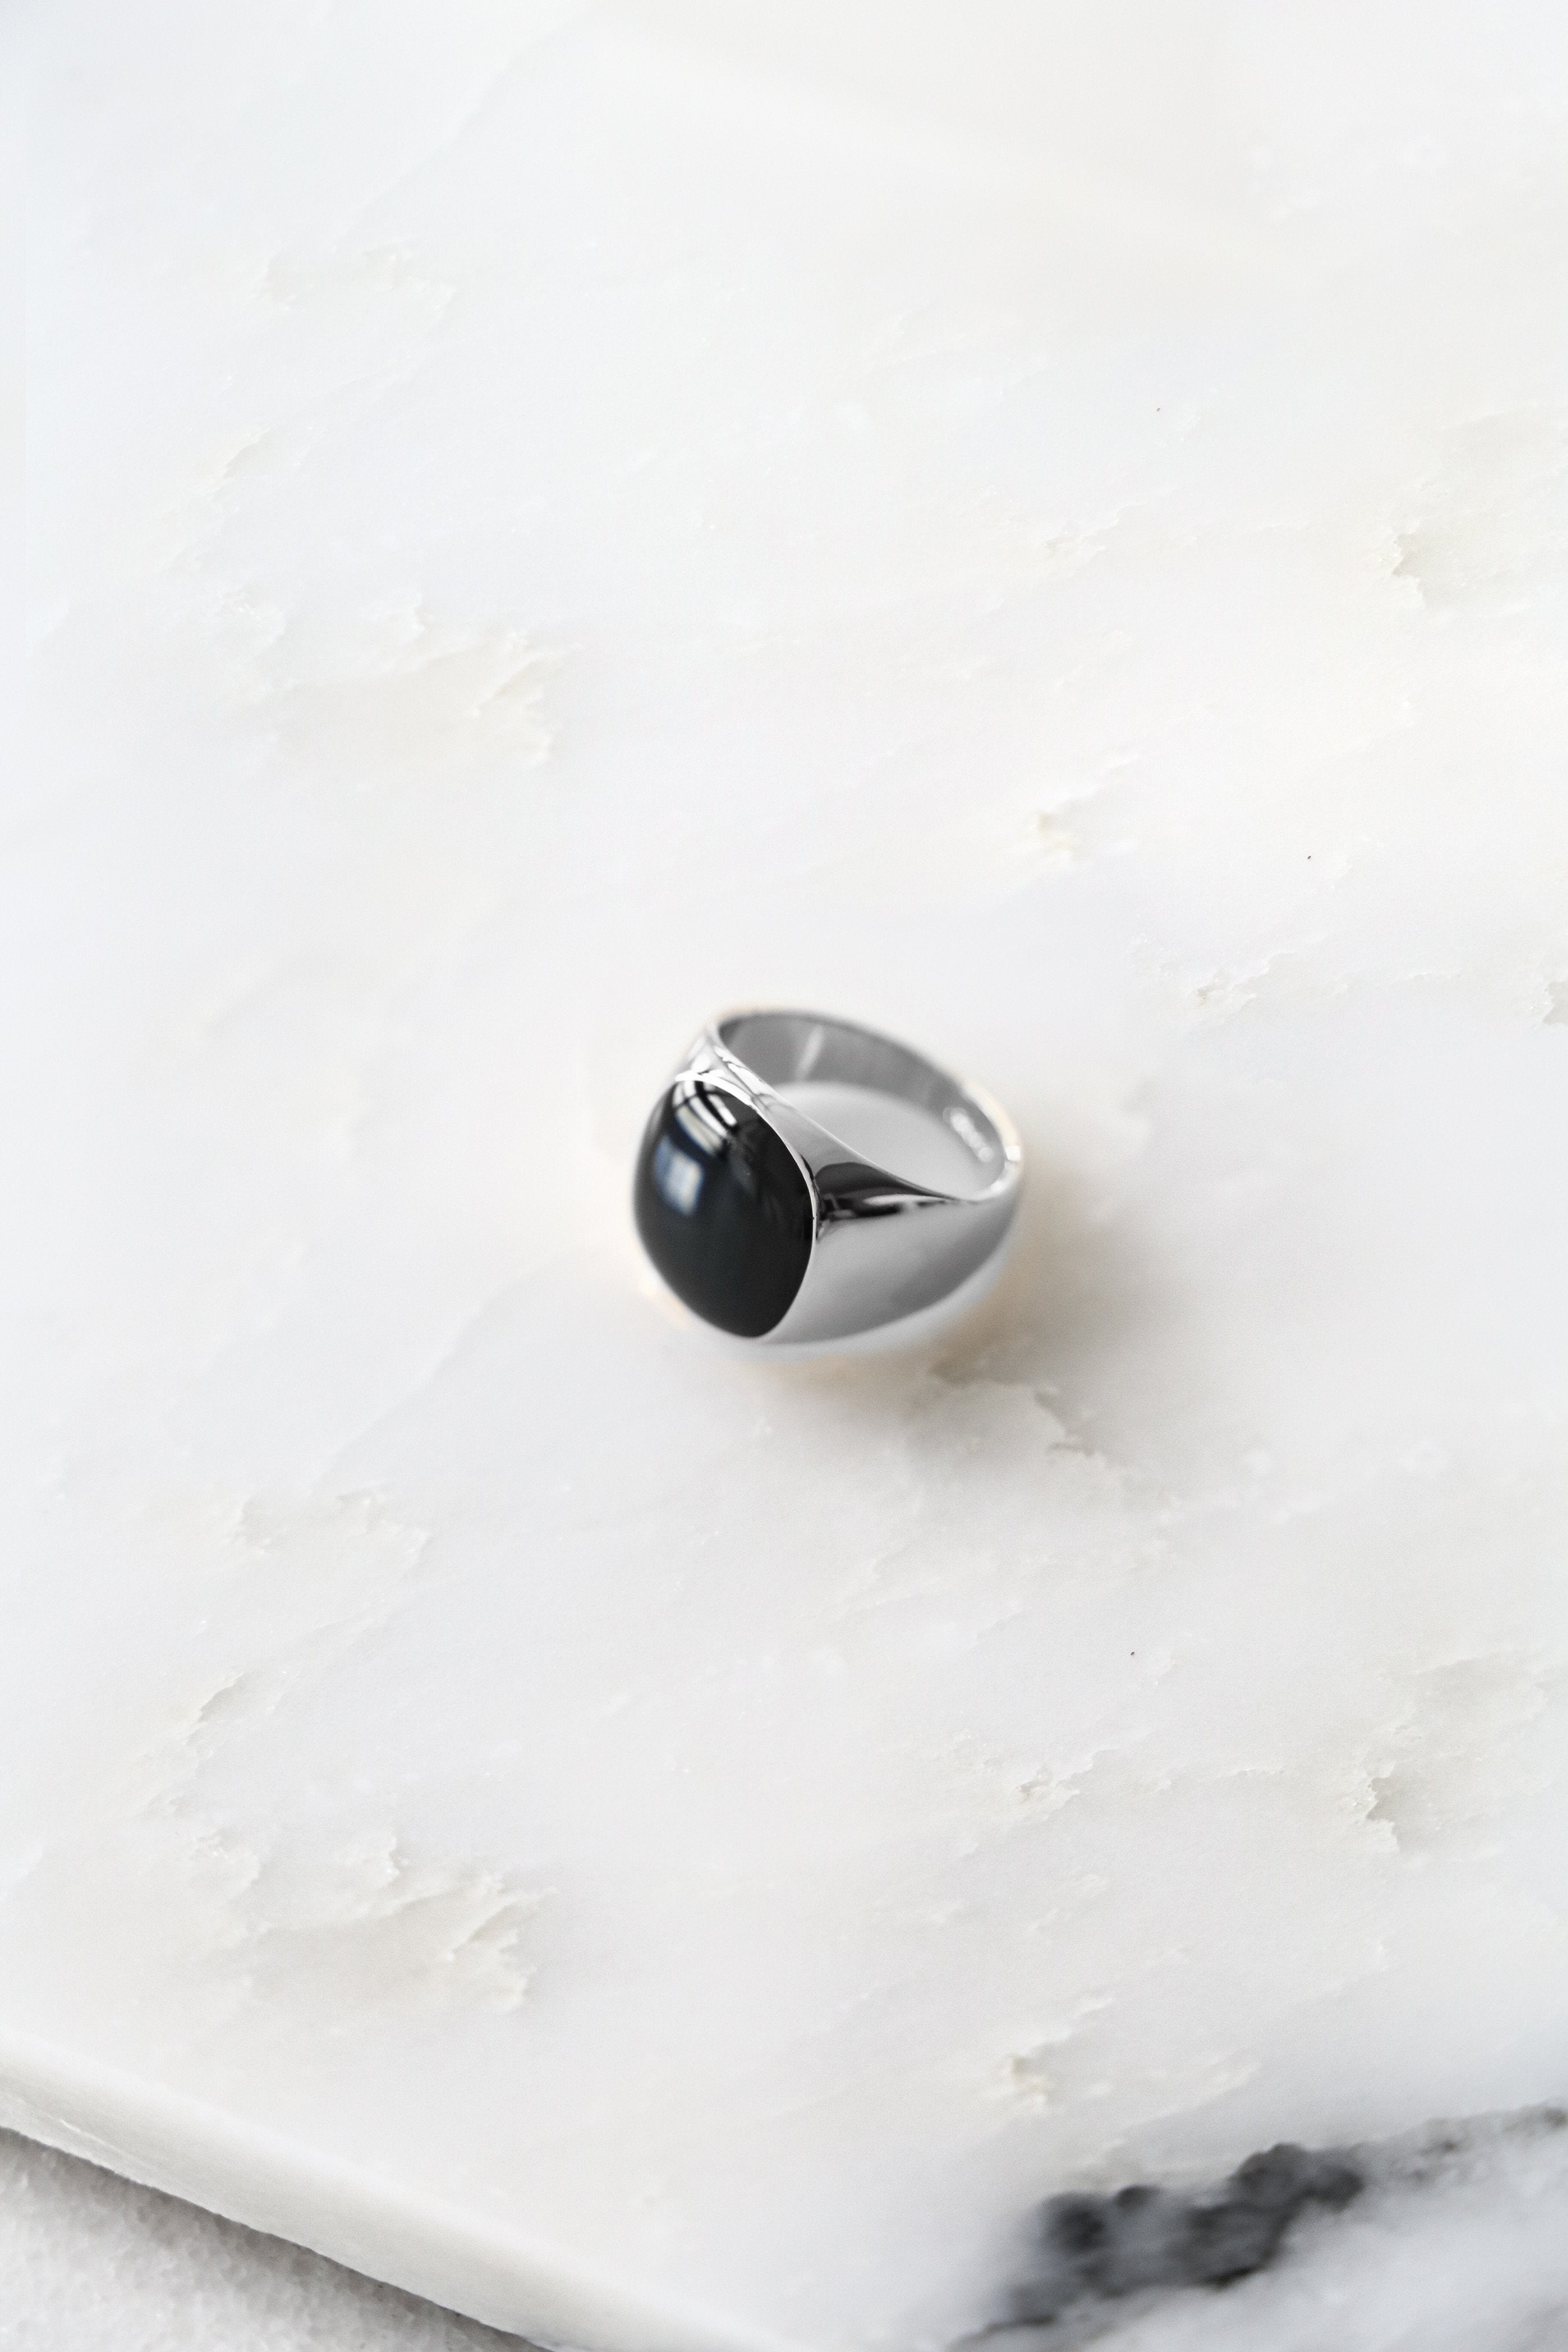 Black Signet Ring - Boutique Minimaliste has waterproof, durable, elegant and vintage inspired jewelry